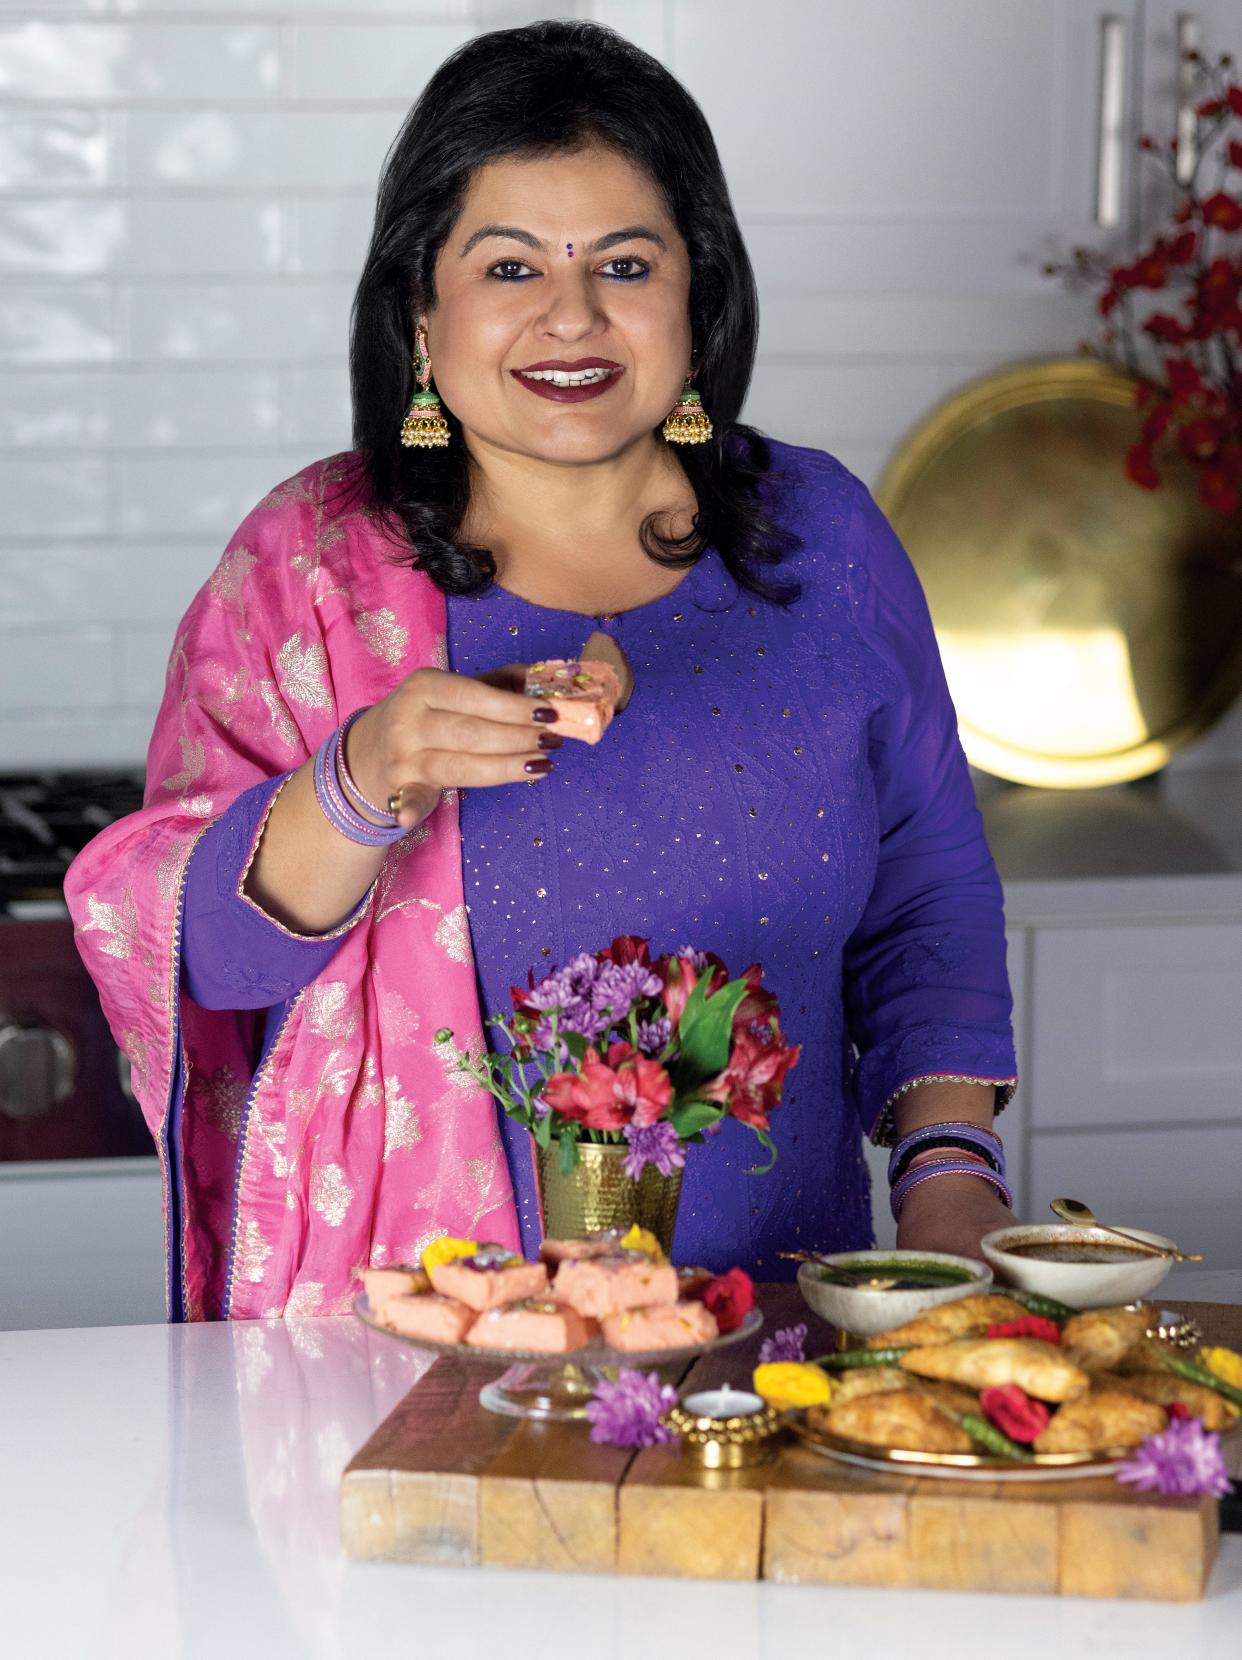 Influencer Anjali Dhir captures the essence of Diwali in traditional attire with homemade Rose Kalakand, potato puffs, and the glow of the Diwali lamp.